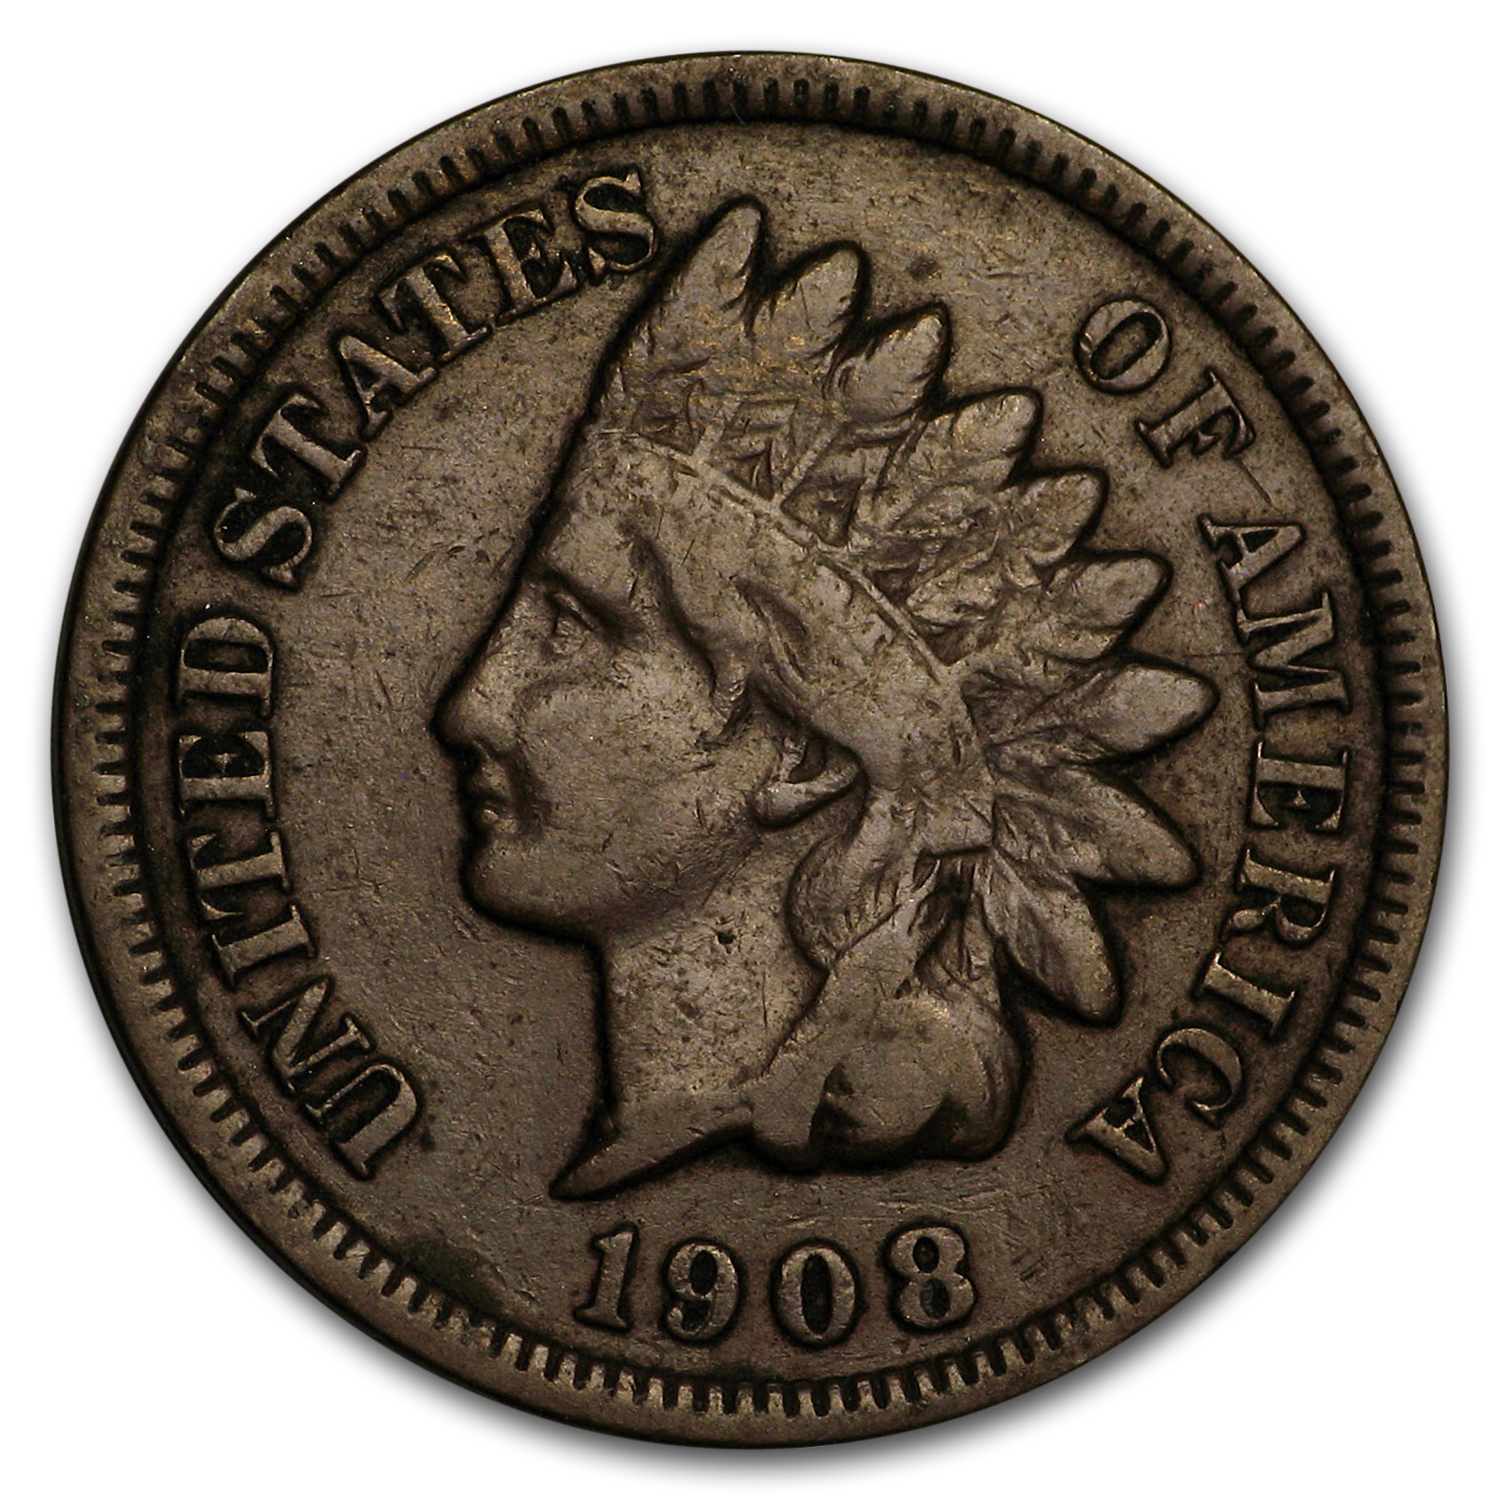 Buy 1908-S Indian Head Cent VG